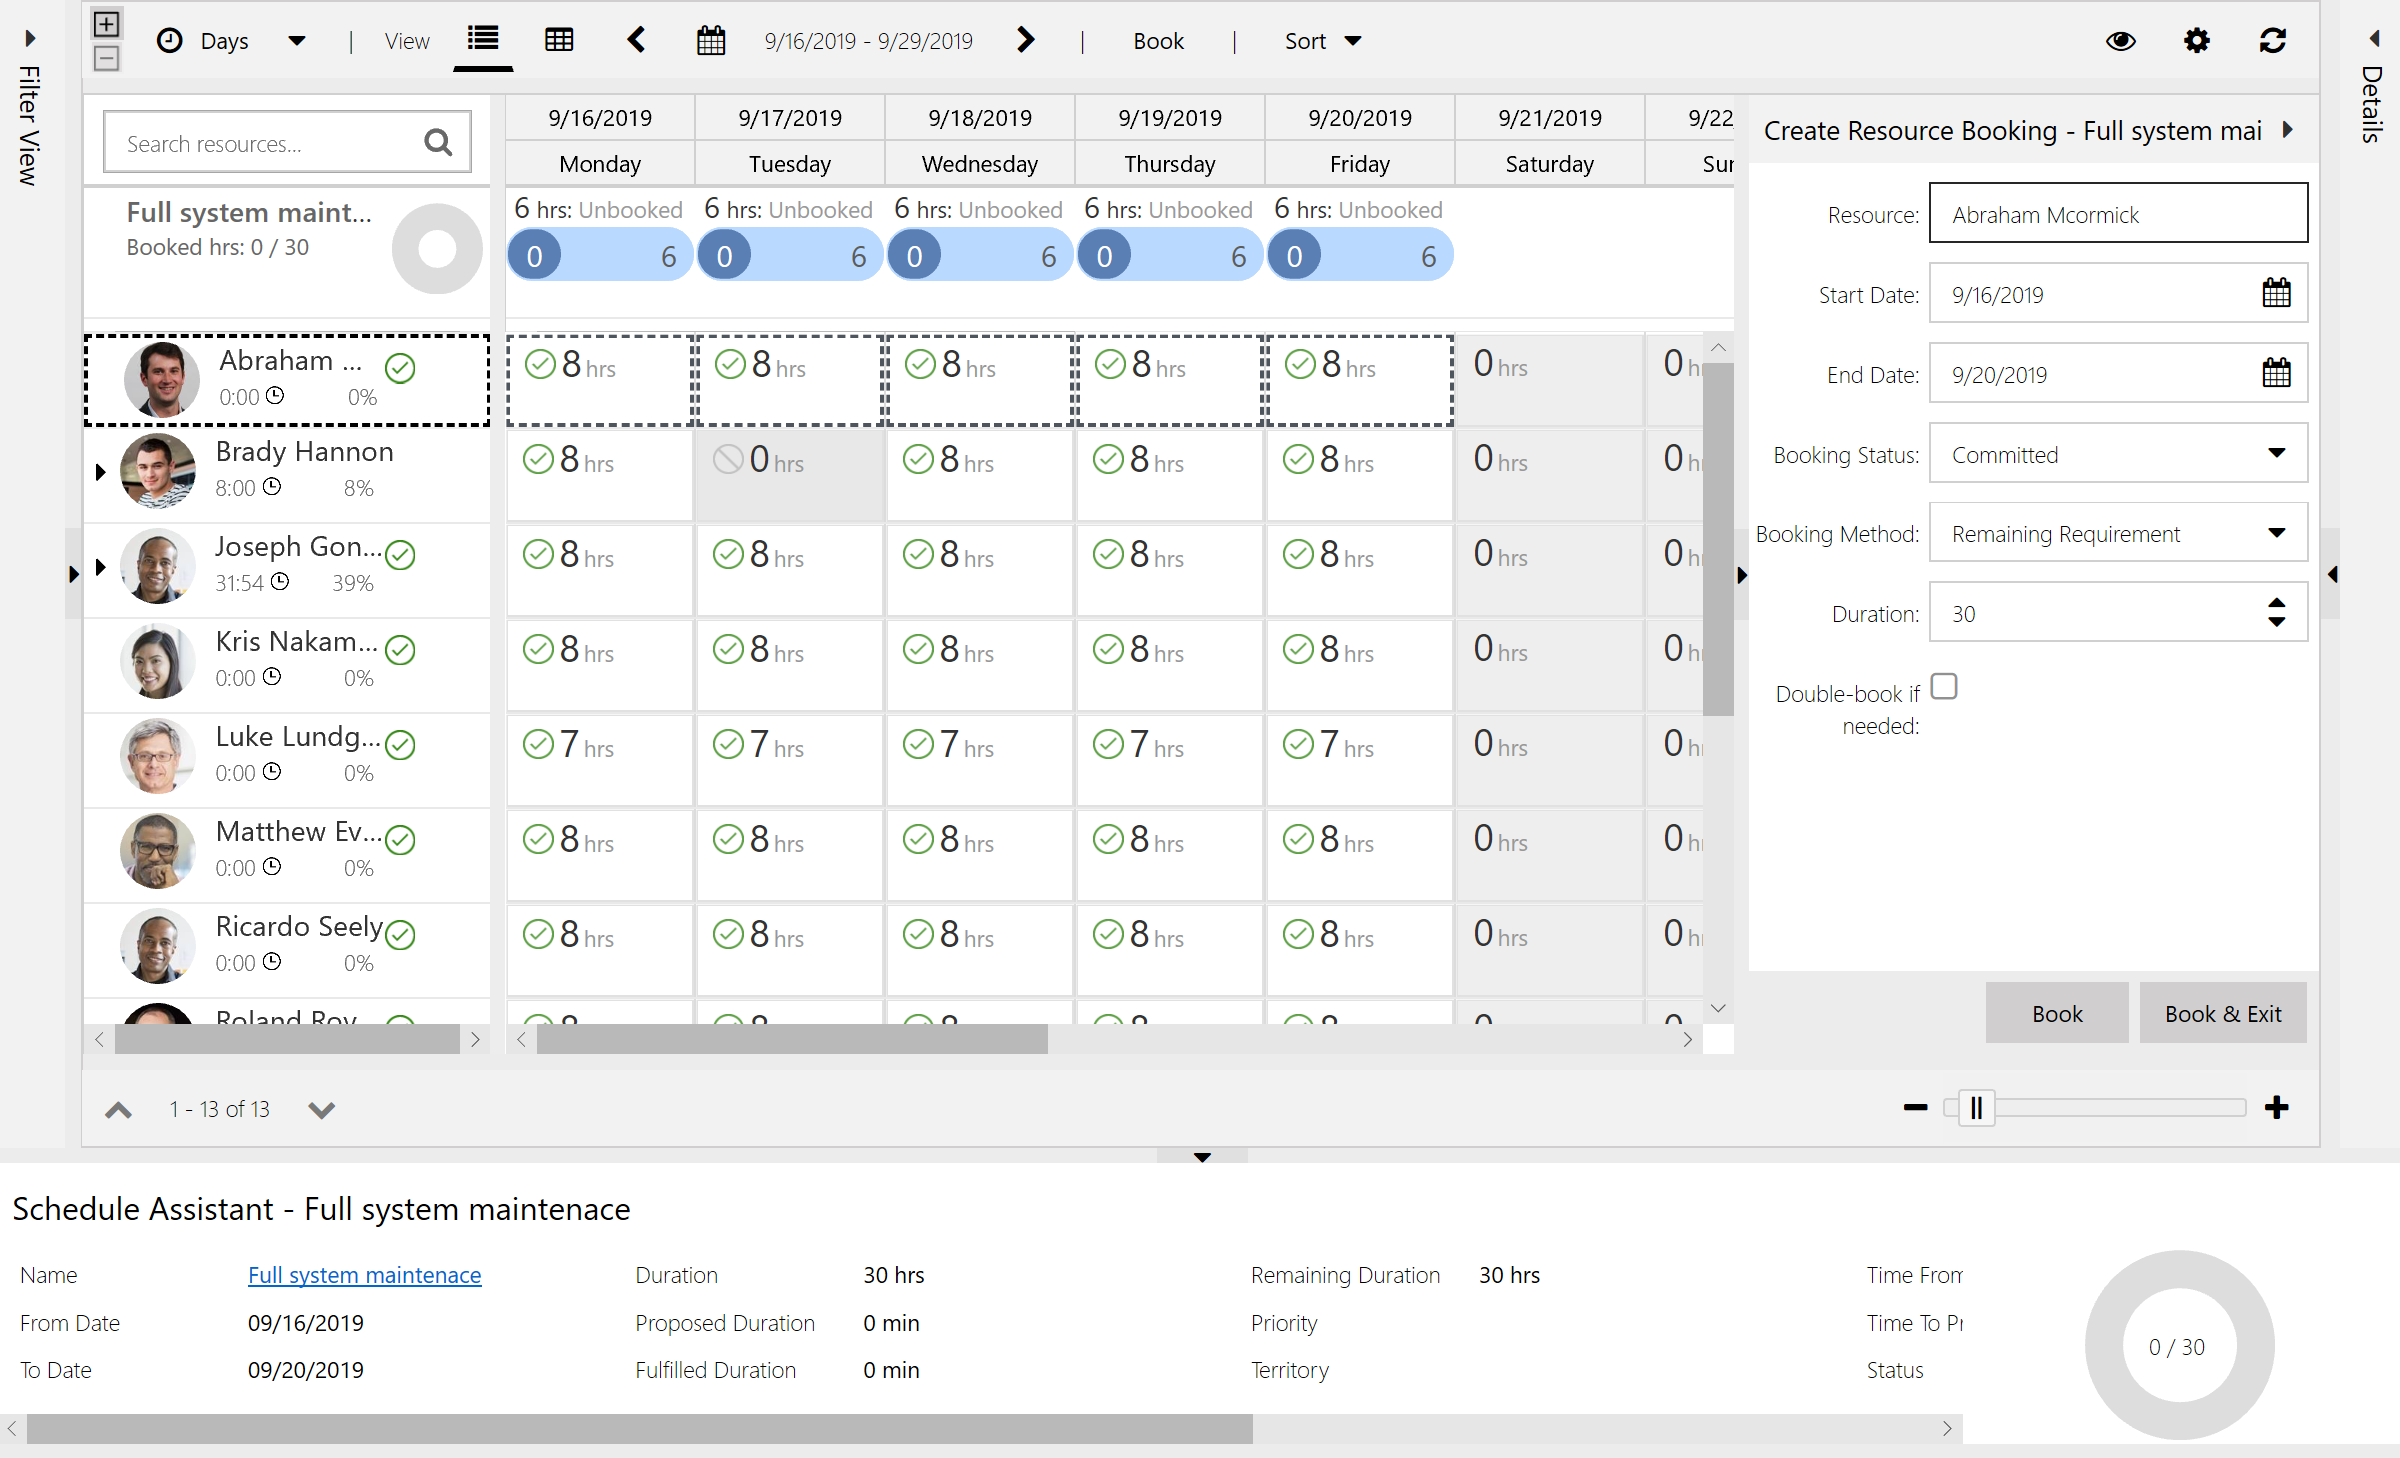 Screenshot of schedule assistant showing resource availability.